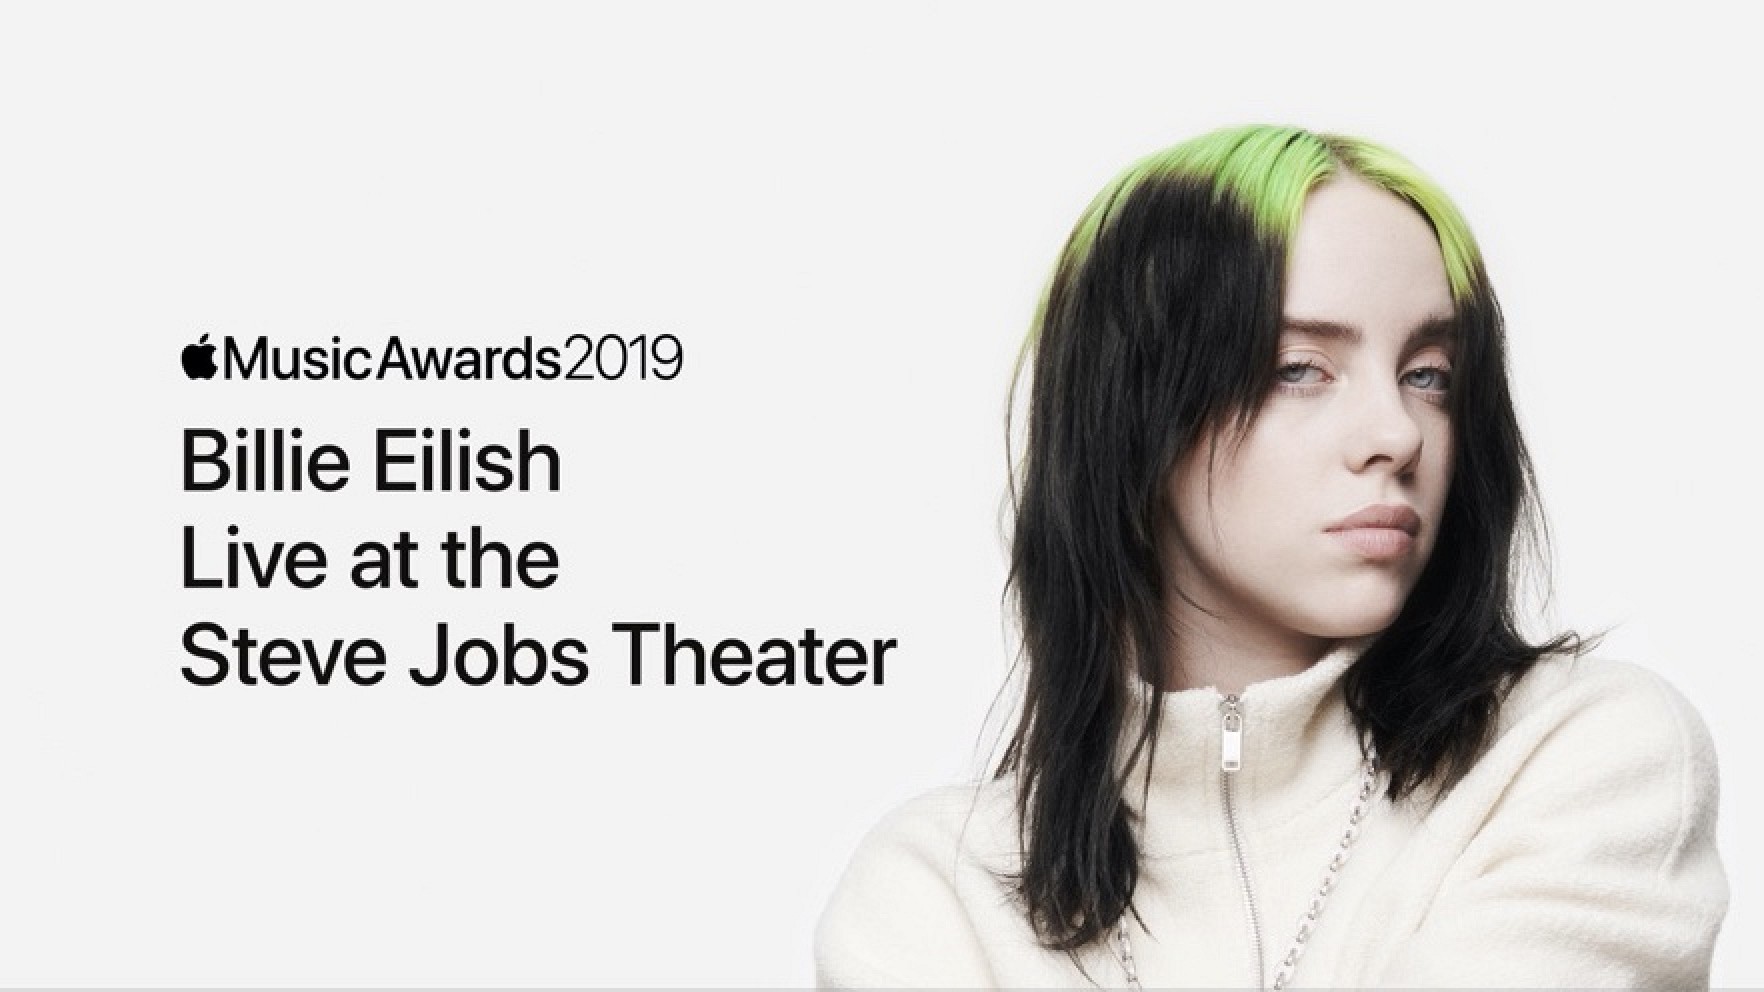 photo of Watch Now: Apple Live Streaming First Ever Apple Music Awards With Billie Eilish Performance image